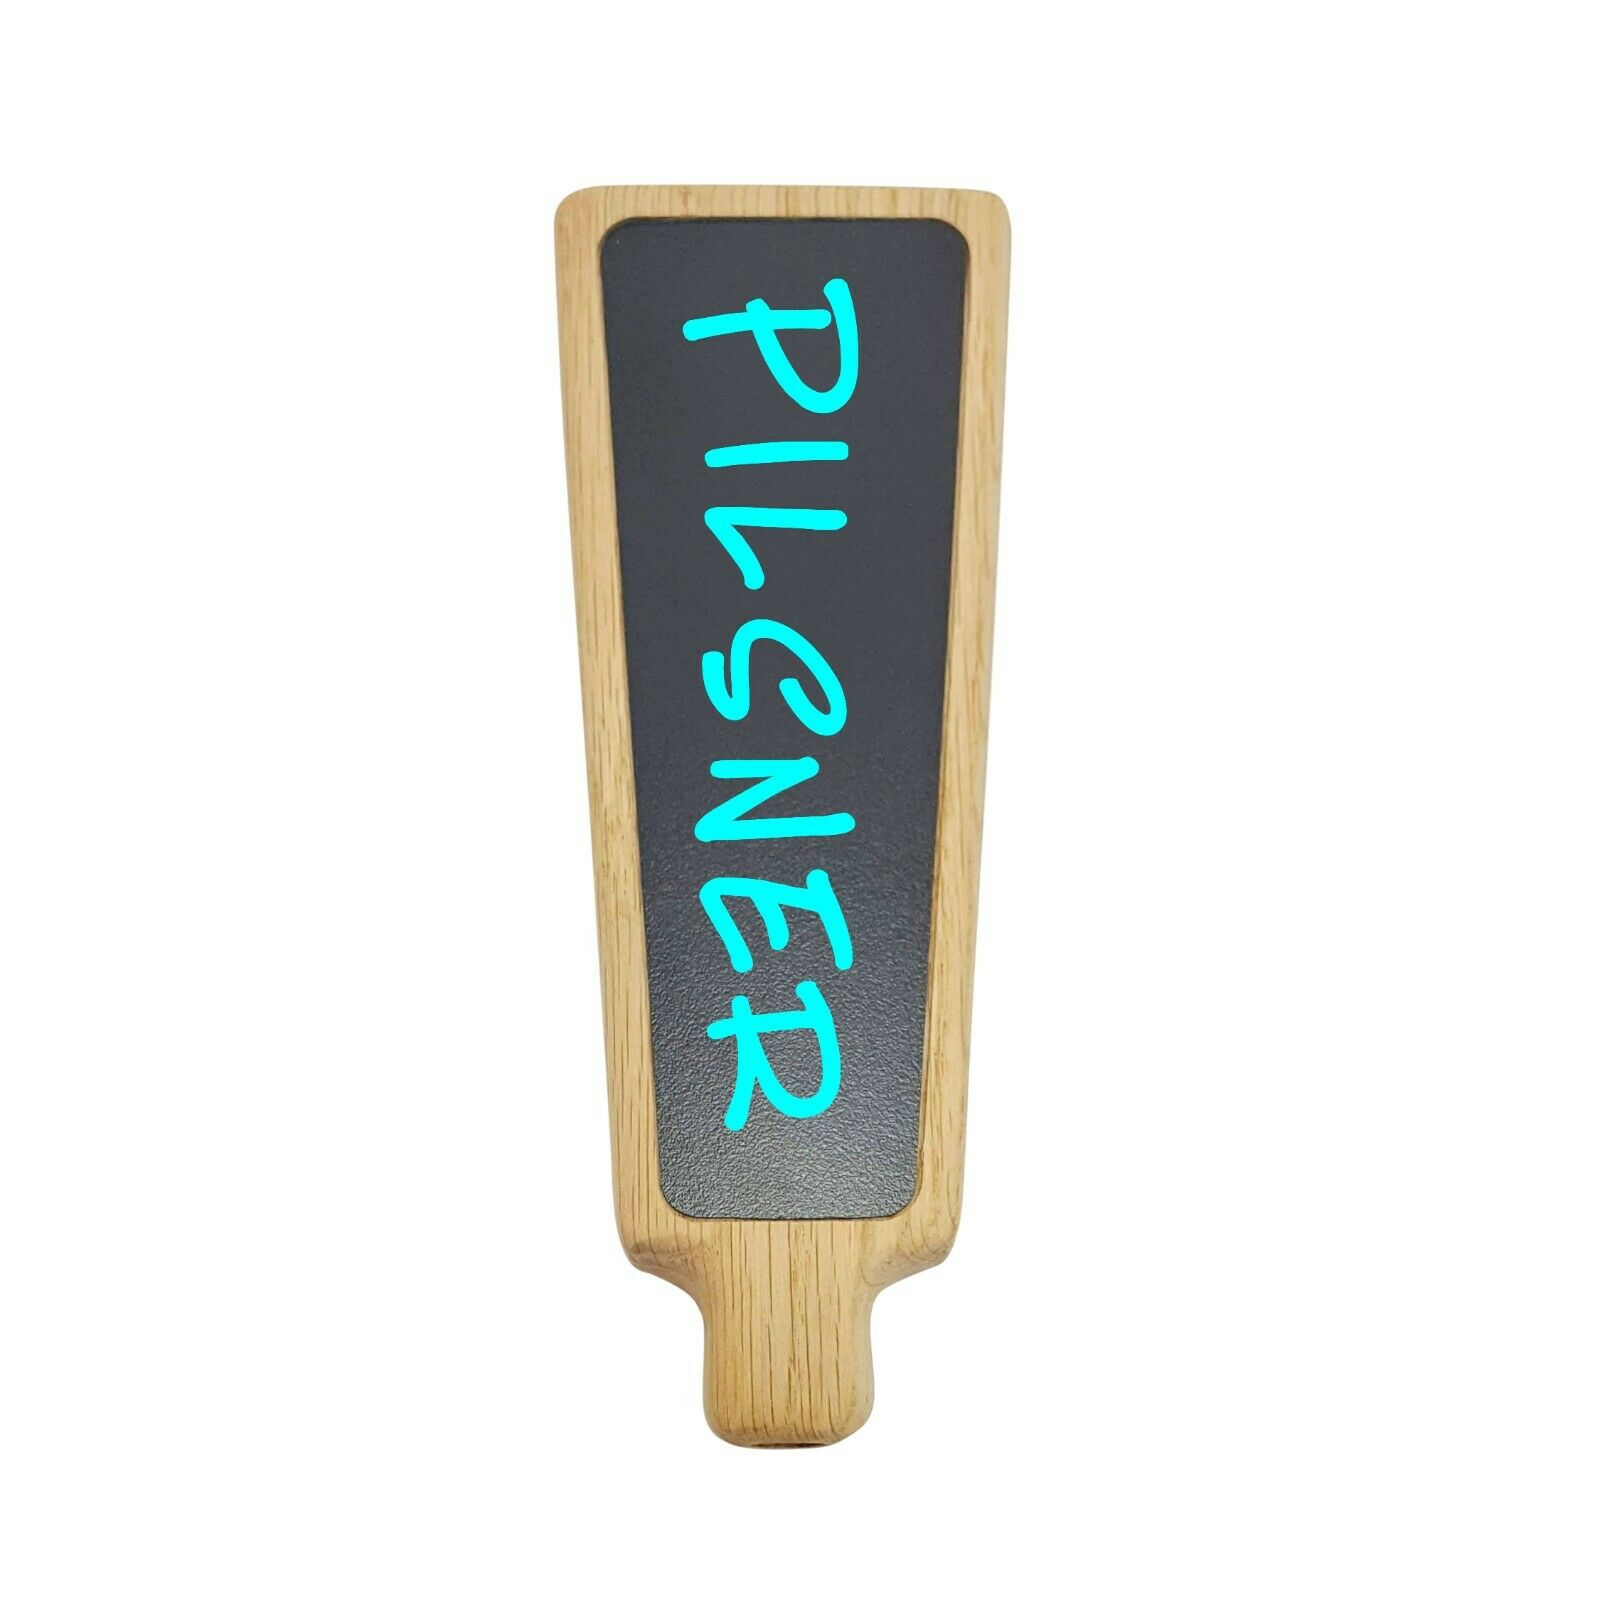 Beer Tap Handle With Black Chalkboard Or White Dry-erase Inserts.